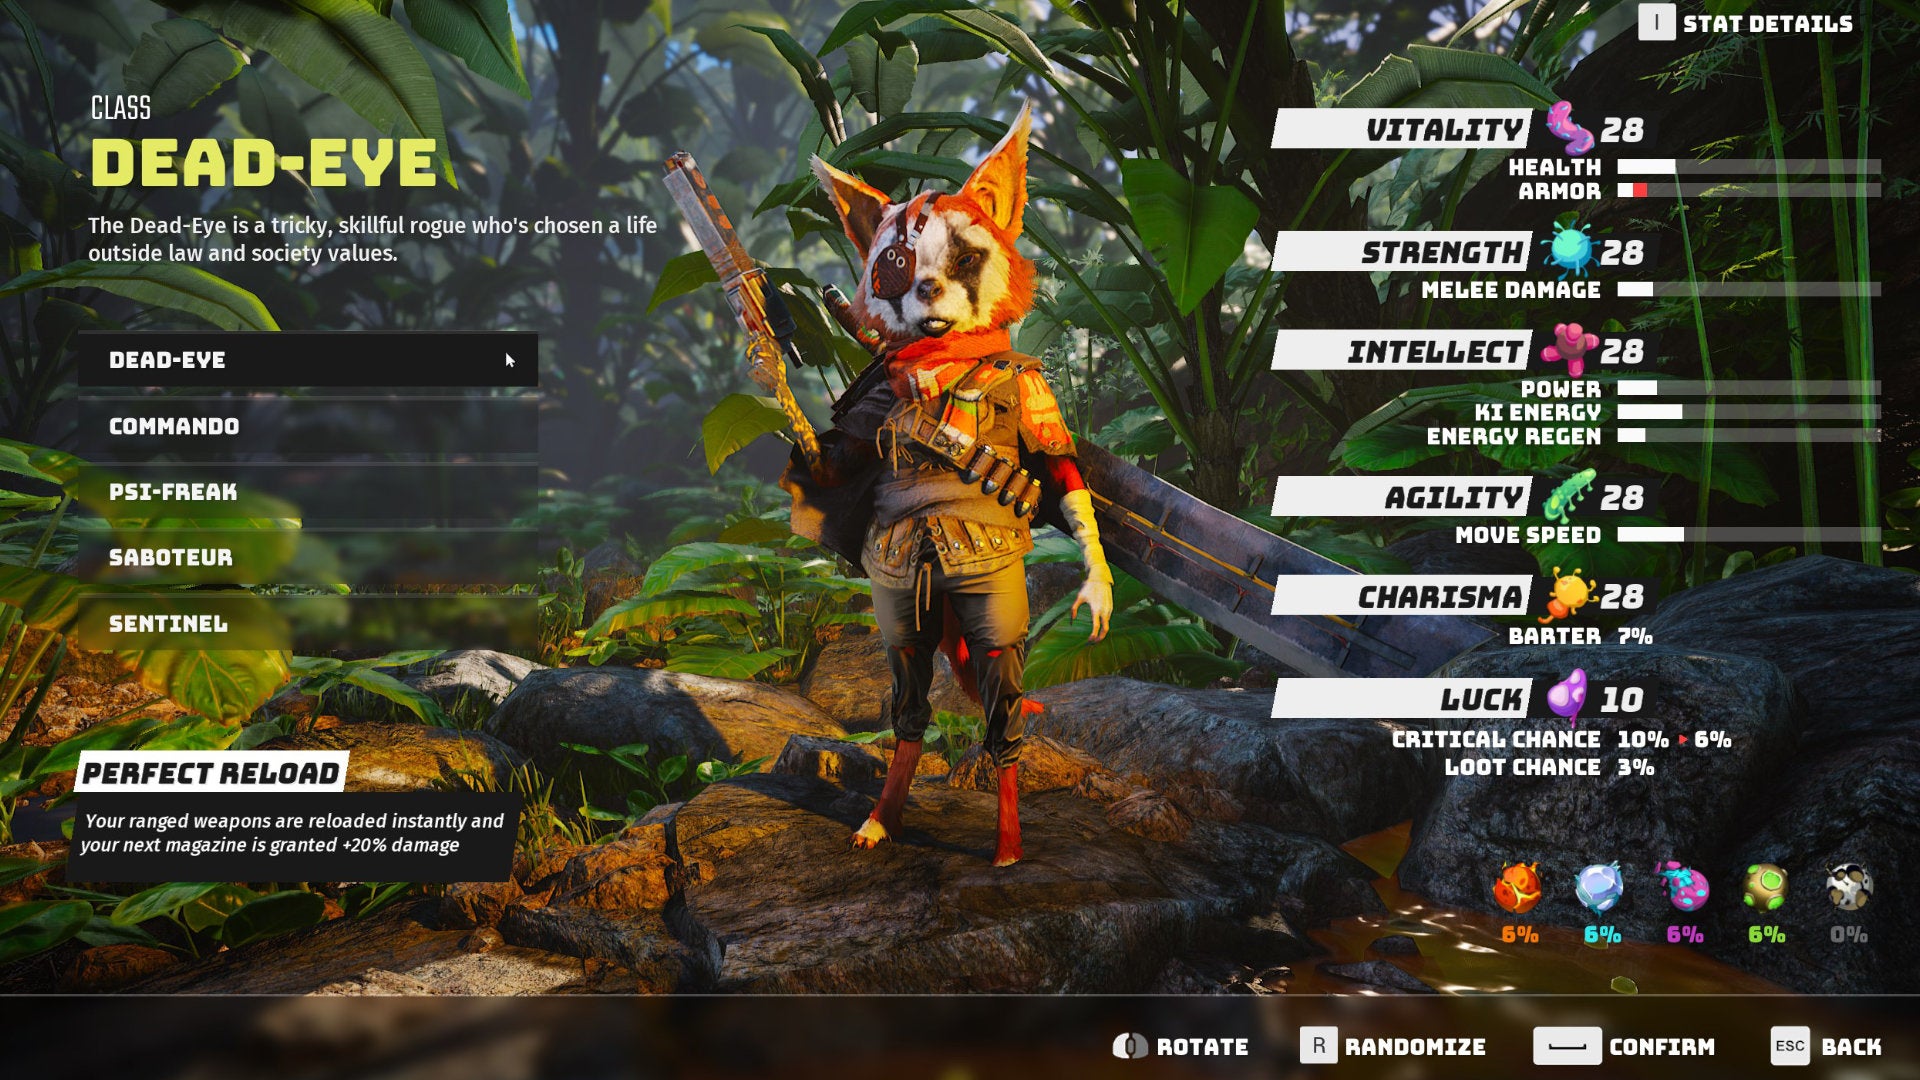 A Biomutant screenshot of the character creation and class selection screen, with the Dead-Eye class selected.